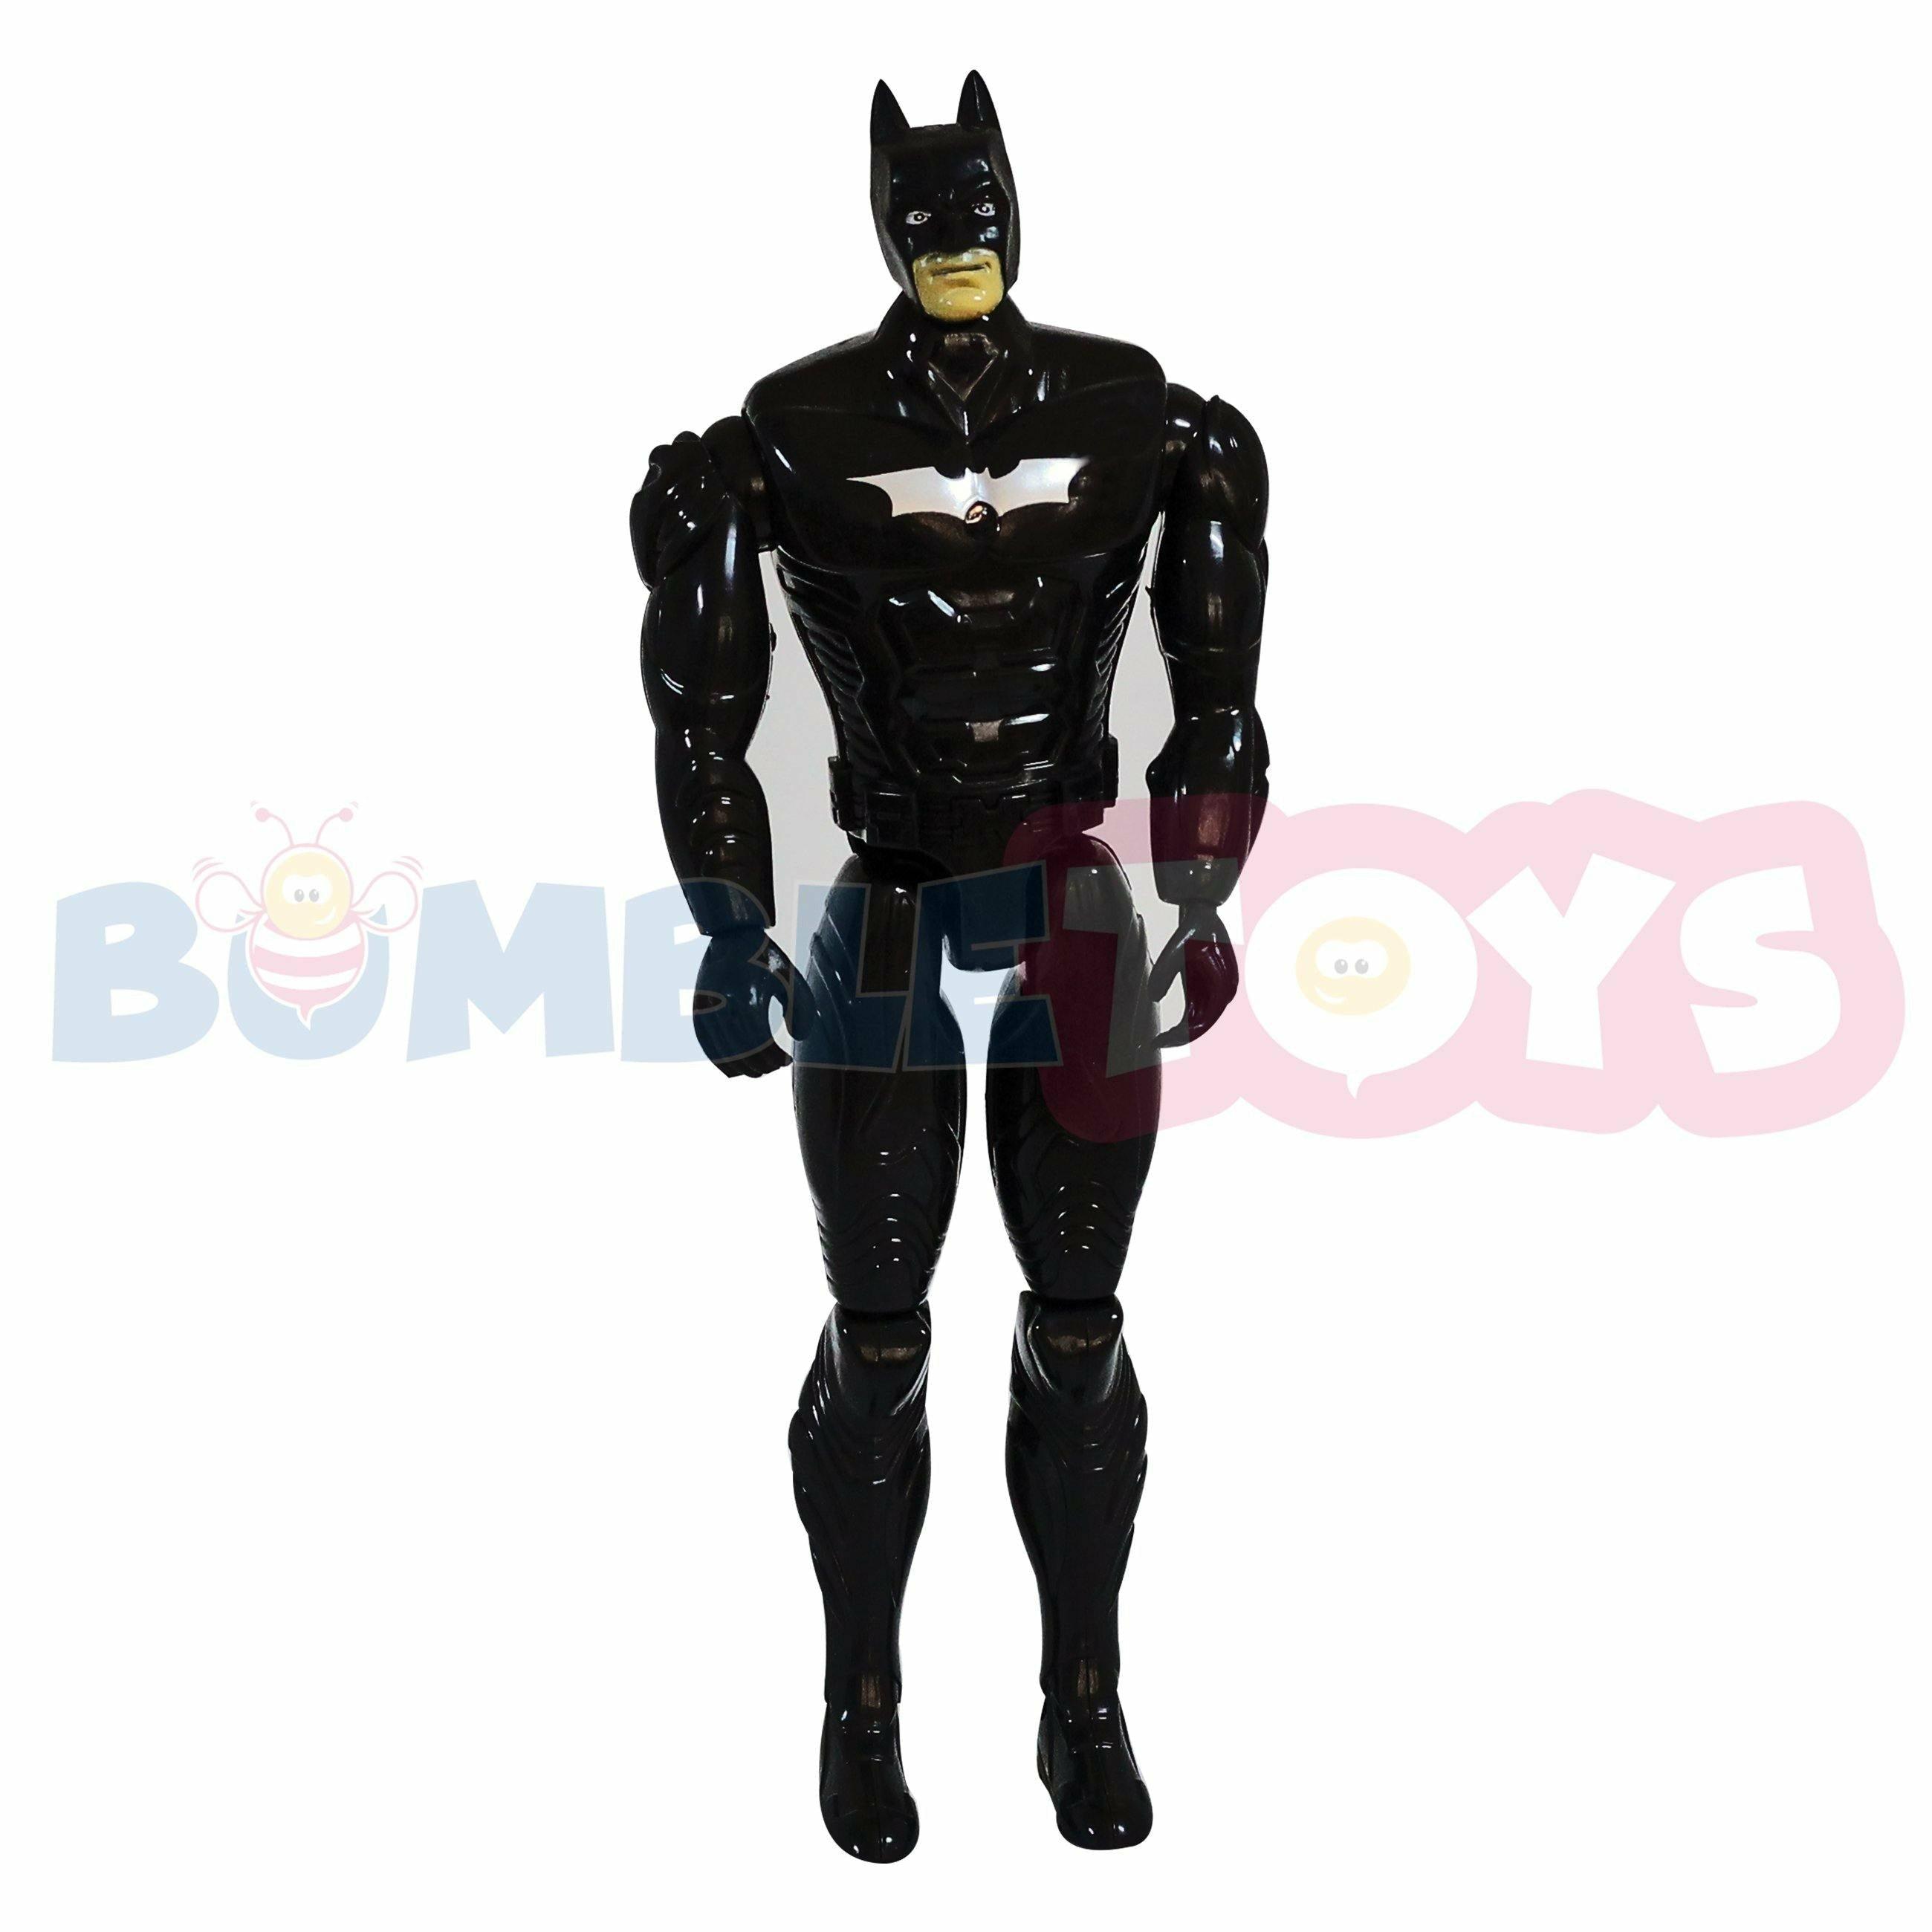 Avengers Heroes Action Figures Series 29 CM - BumbleToys - 5-7 Years, Avengers, Boys, DC Comics, Figures, Toy House